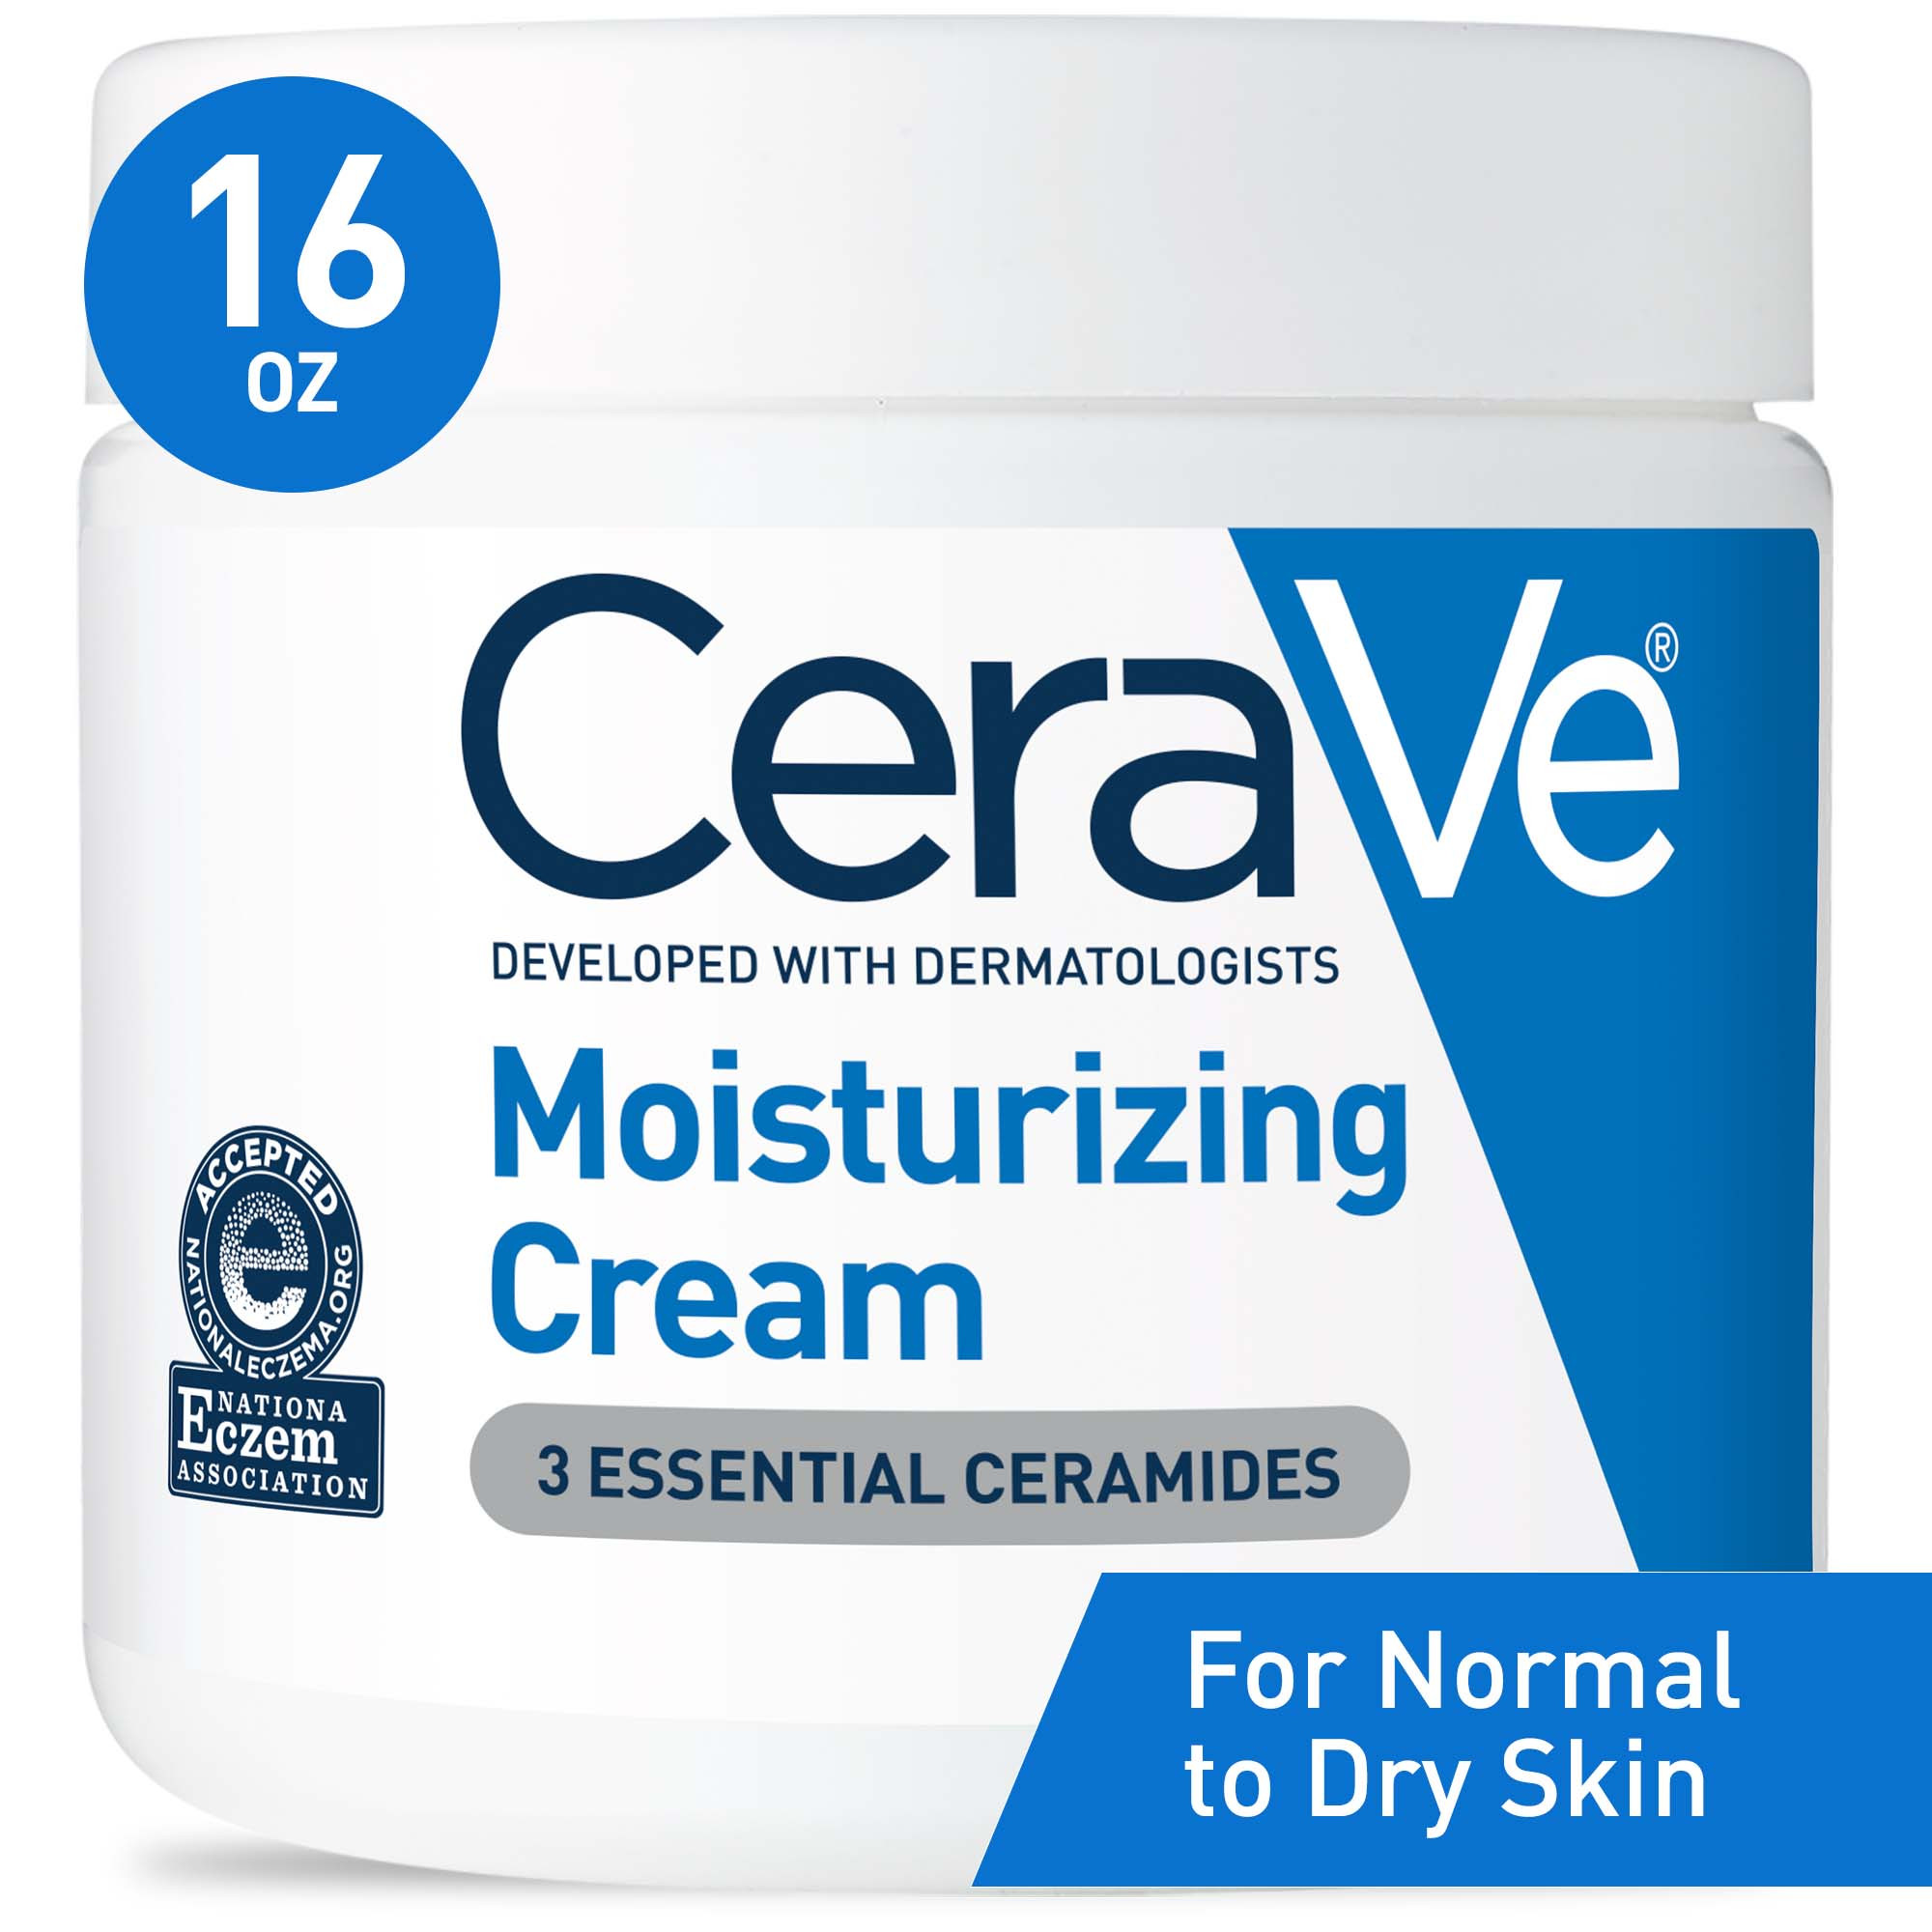 CeraVe Moisturizing Cream, Face & Body Moisturizer for Normal to Very Dry Skin, 16 oz - image 1 of 14